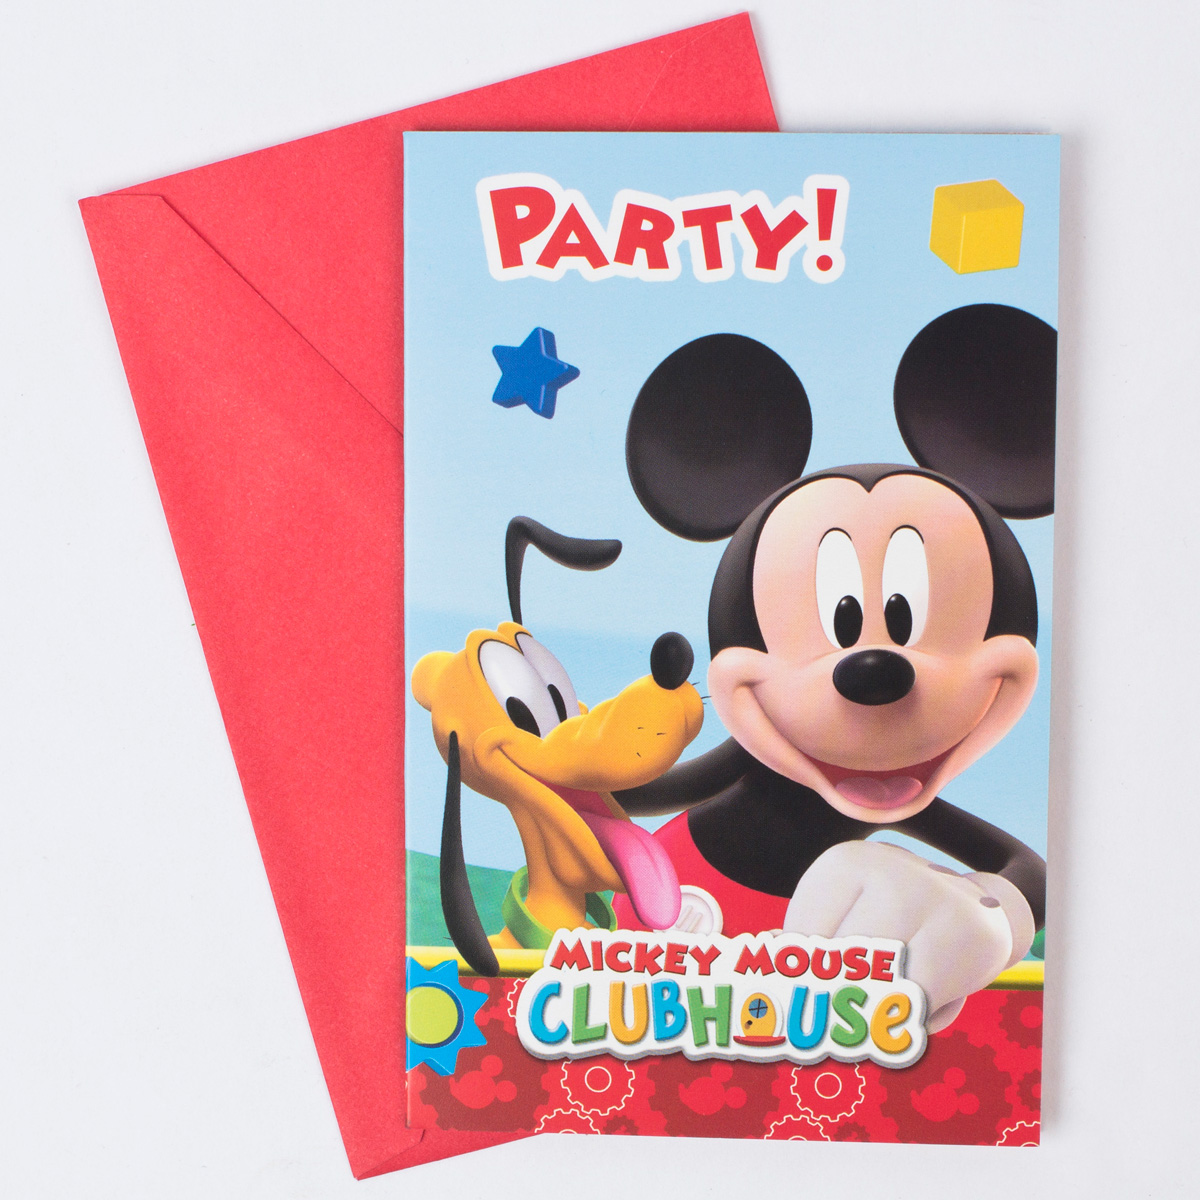 Disney Mickey Mouse Clubhouse Party Invitations - Pack Of 6